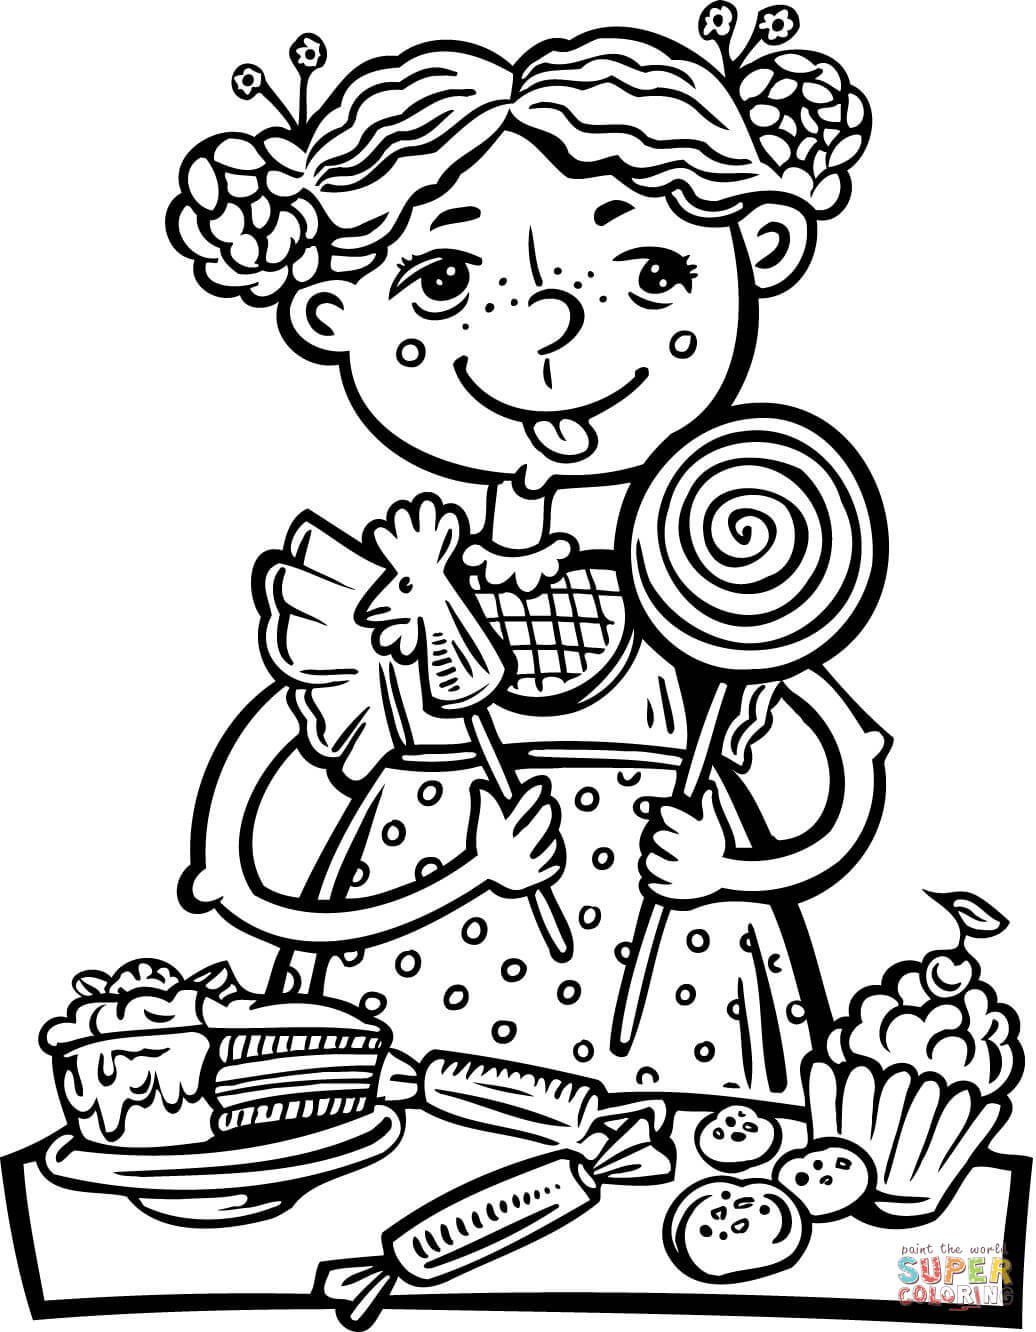 Girl Eating a Lot of Candy and Snacks coloring page | Free Printable Coloring  Pages